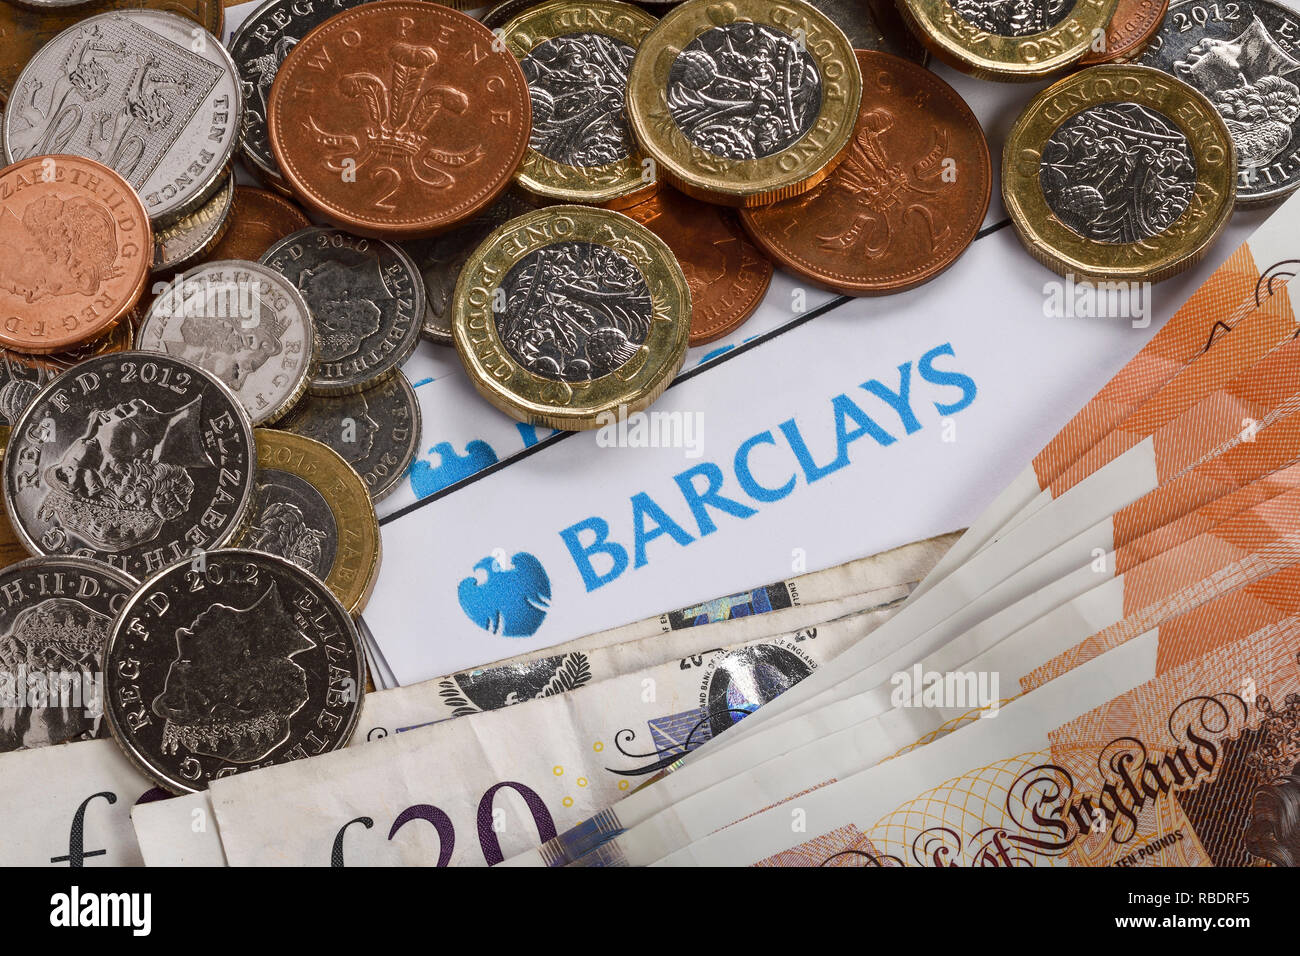 A Barclays bank logo with some cash Stock Photo